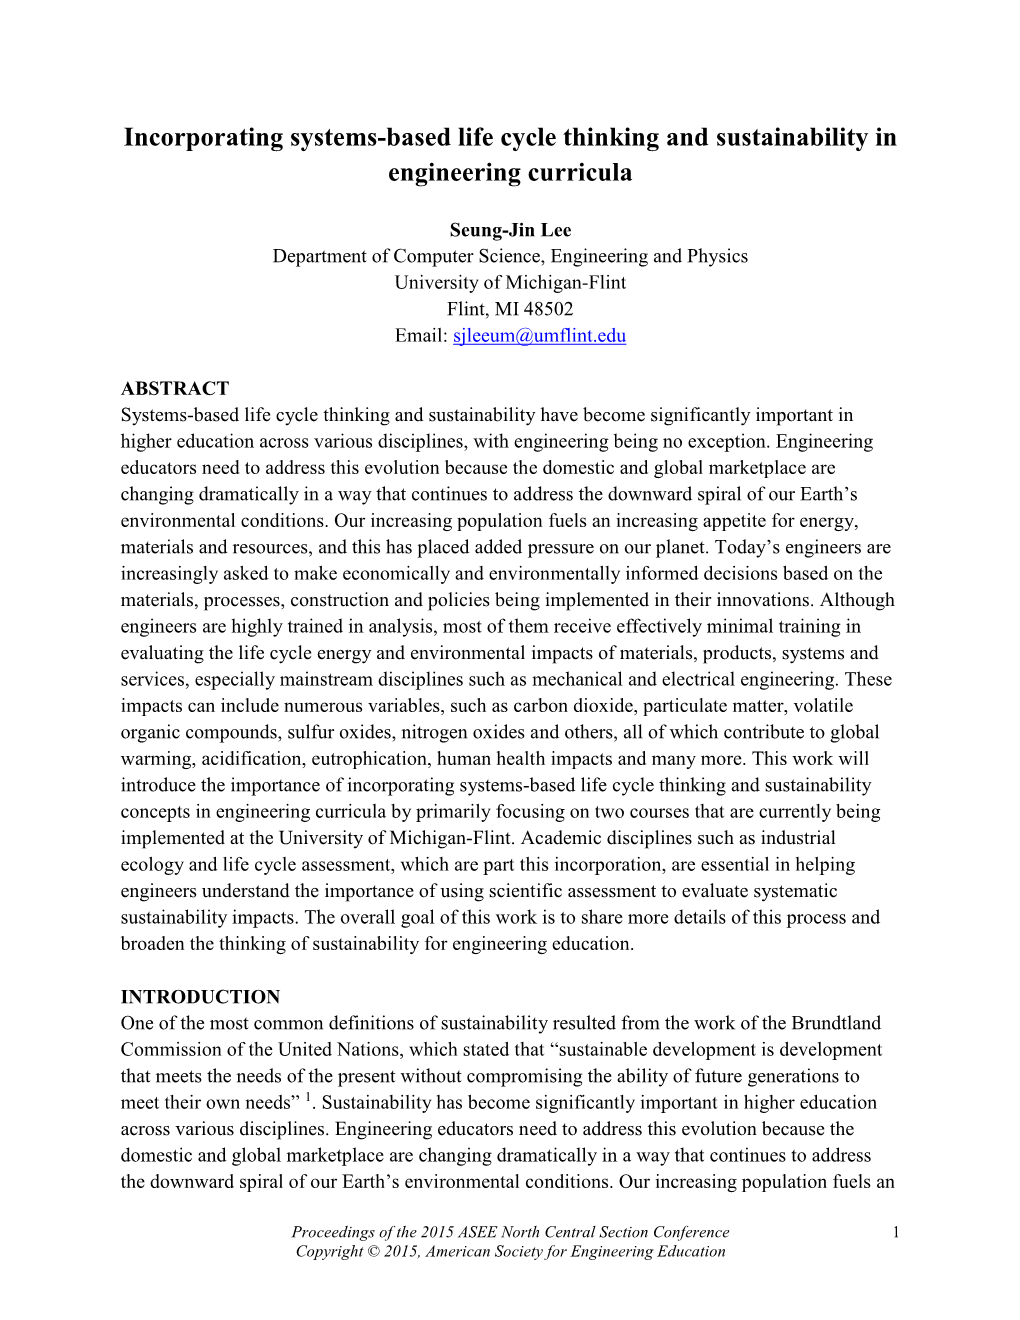 Incorporating Systems-Based Life Cycle Thinking and Sustainability in Engineering Curricula